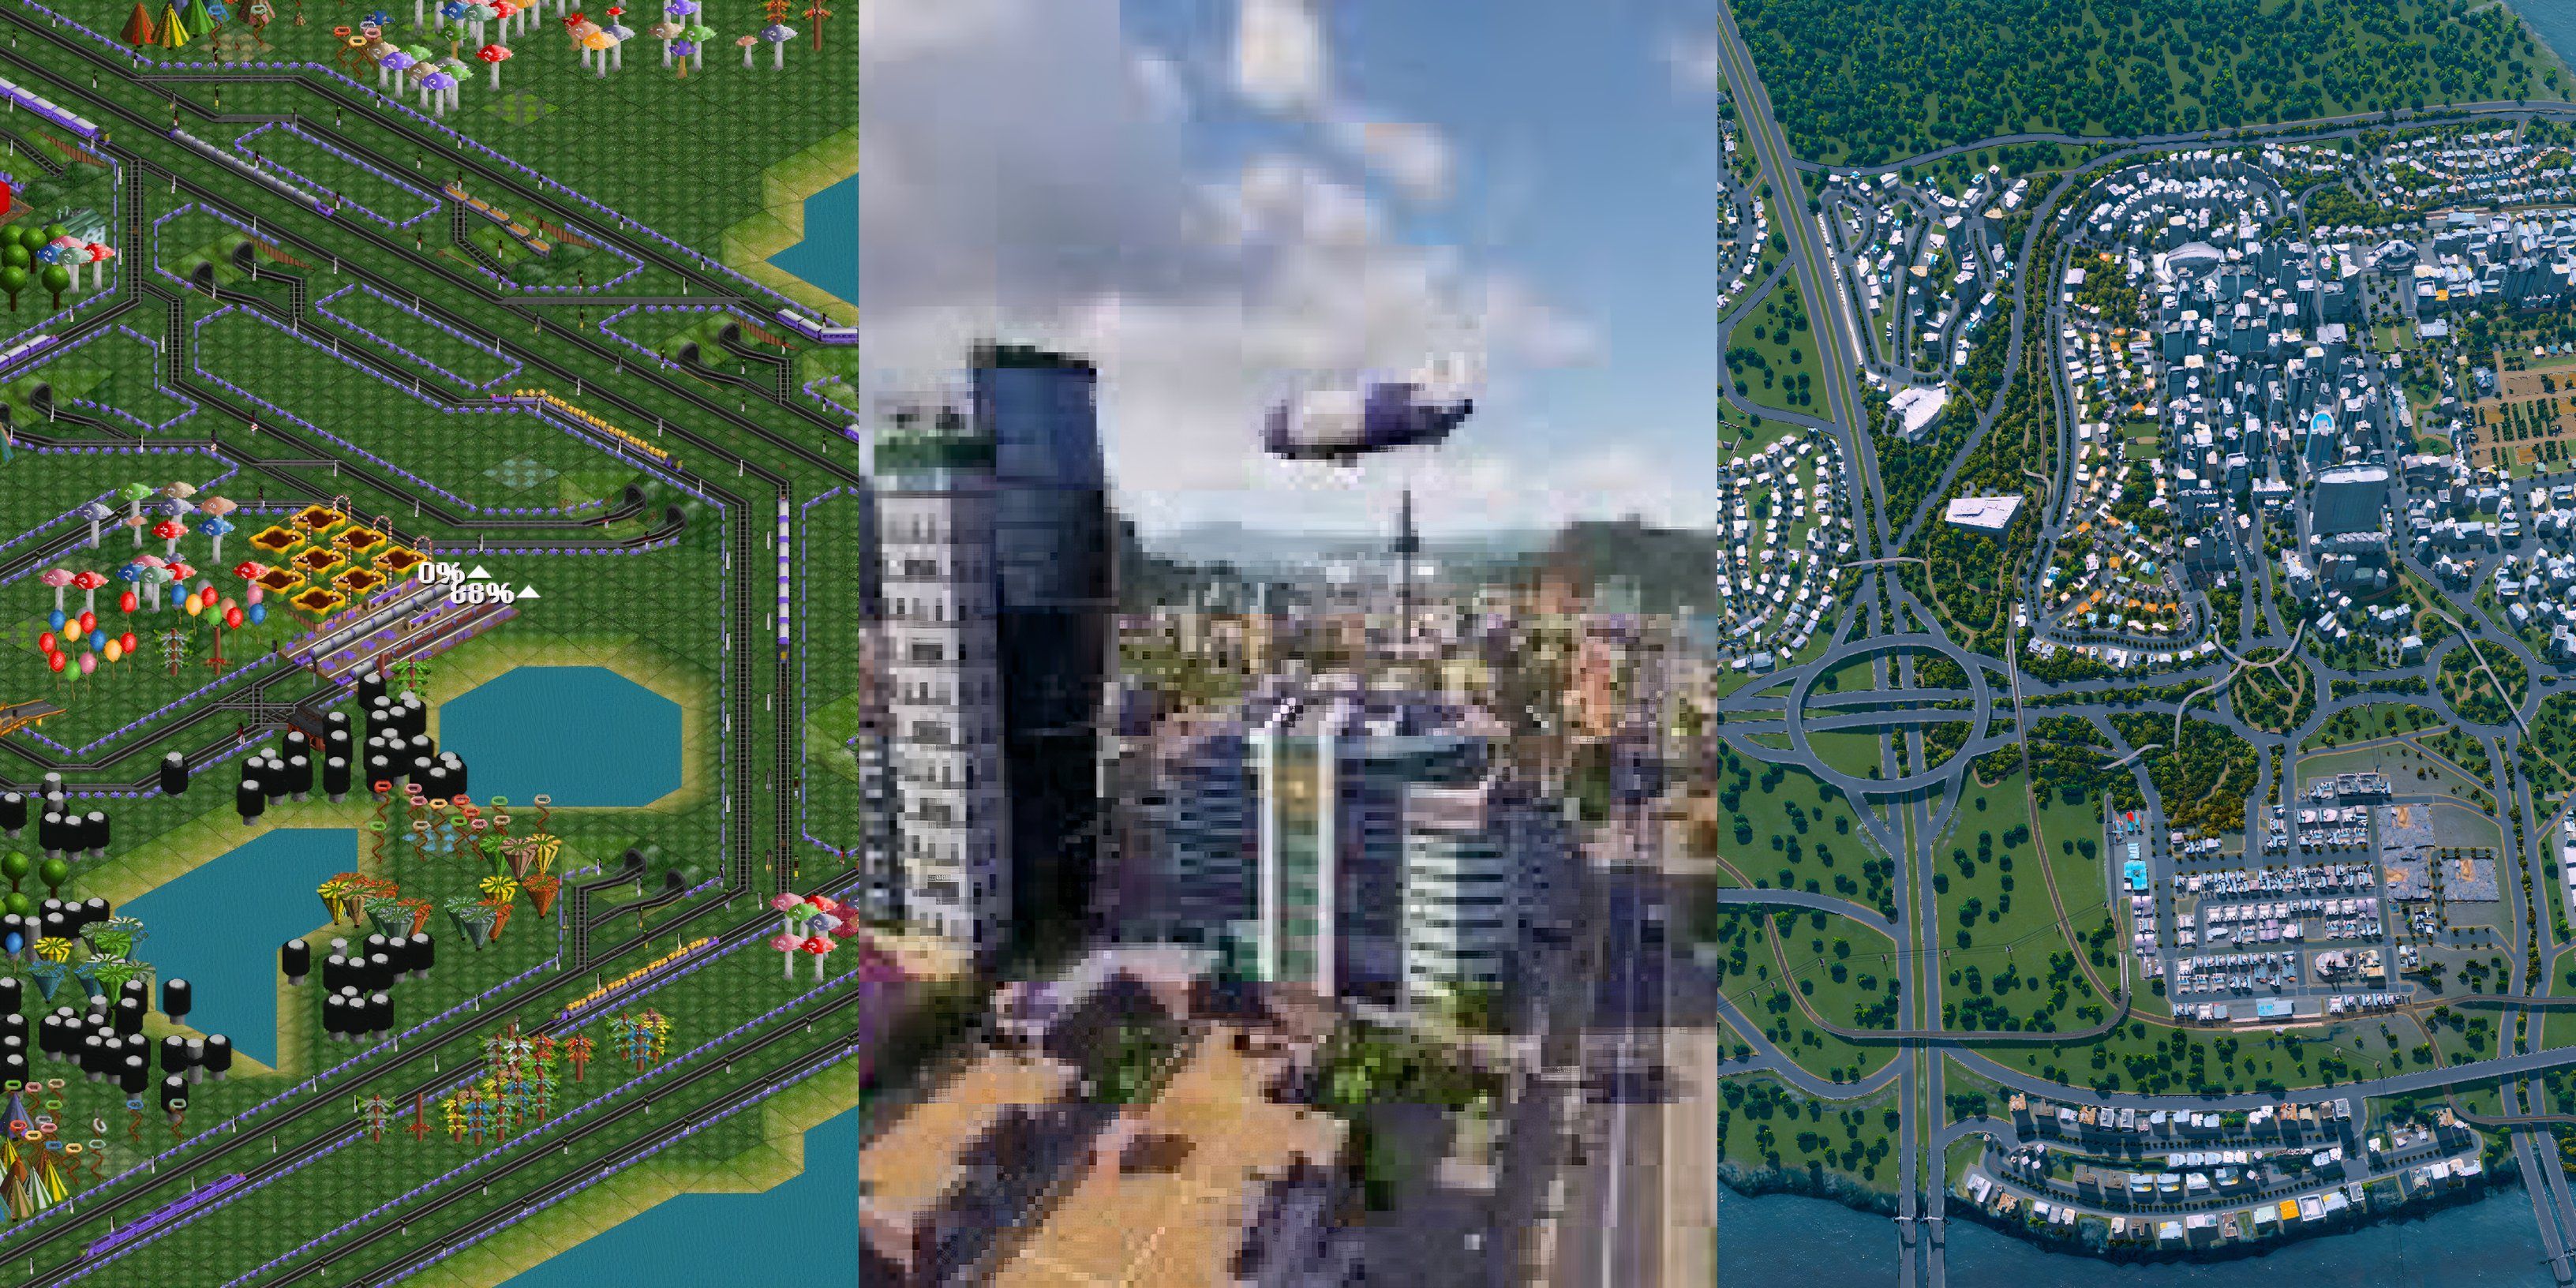 Transport Tycoon (left), Tropico 6 (middle), and Cities: Skylines (right)